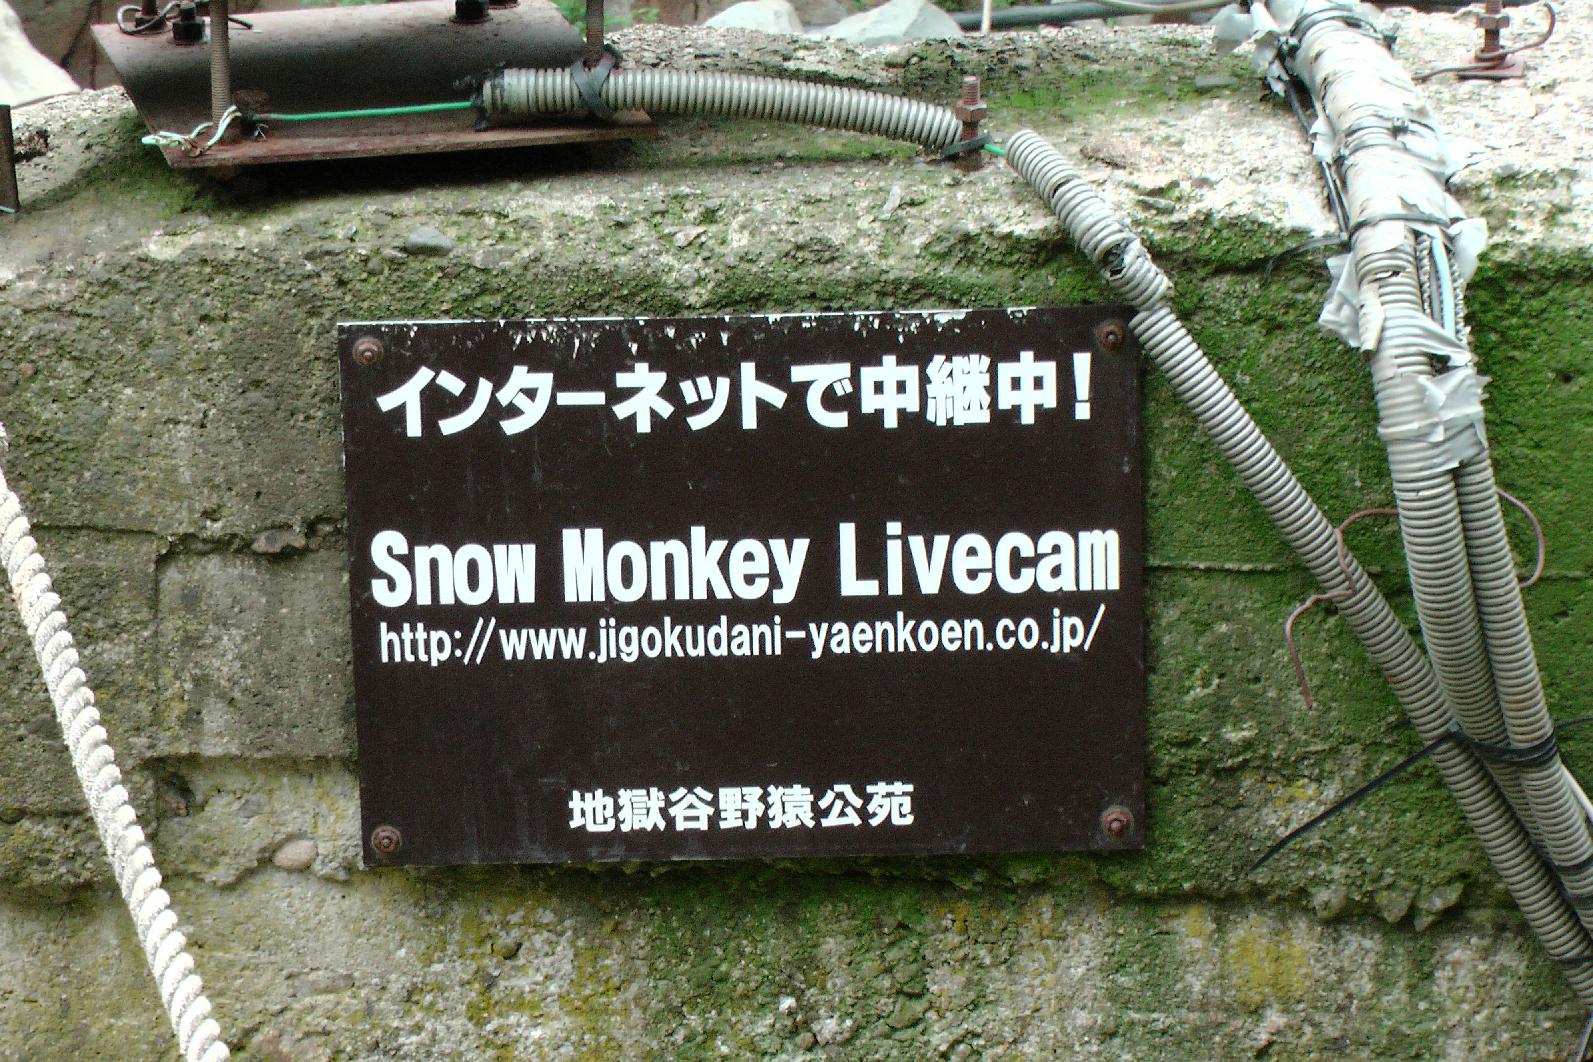 Sign without Monkeys